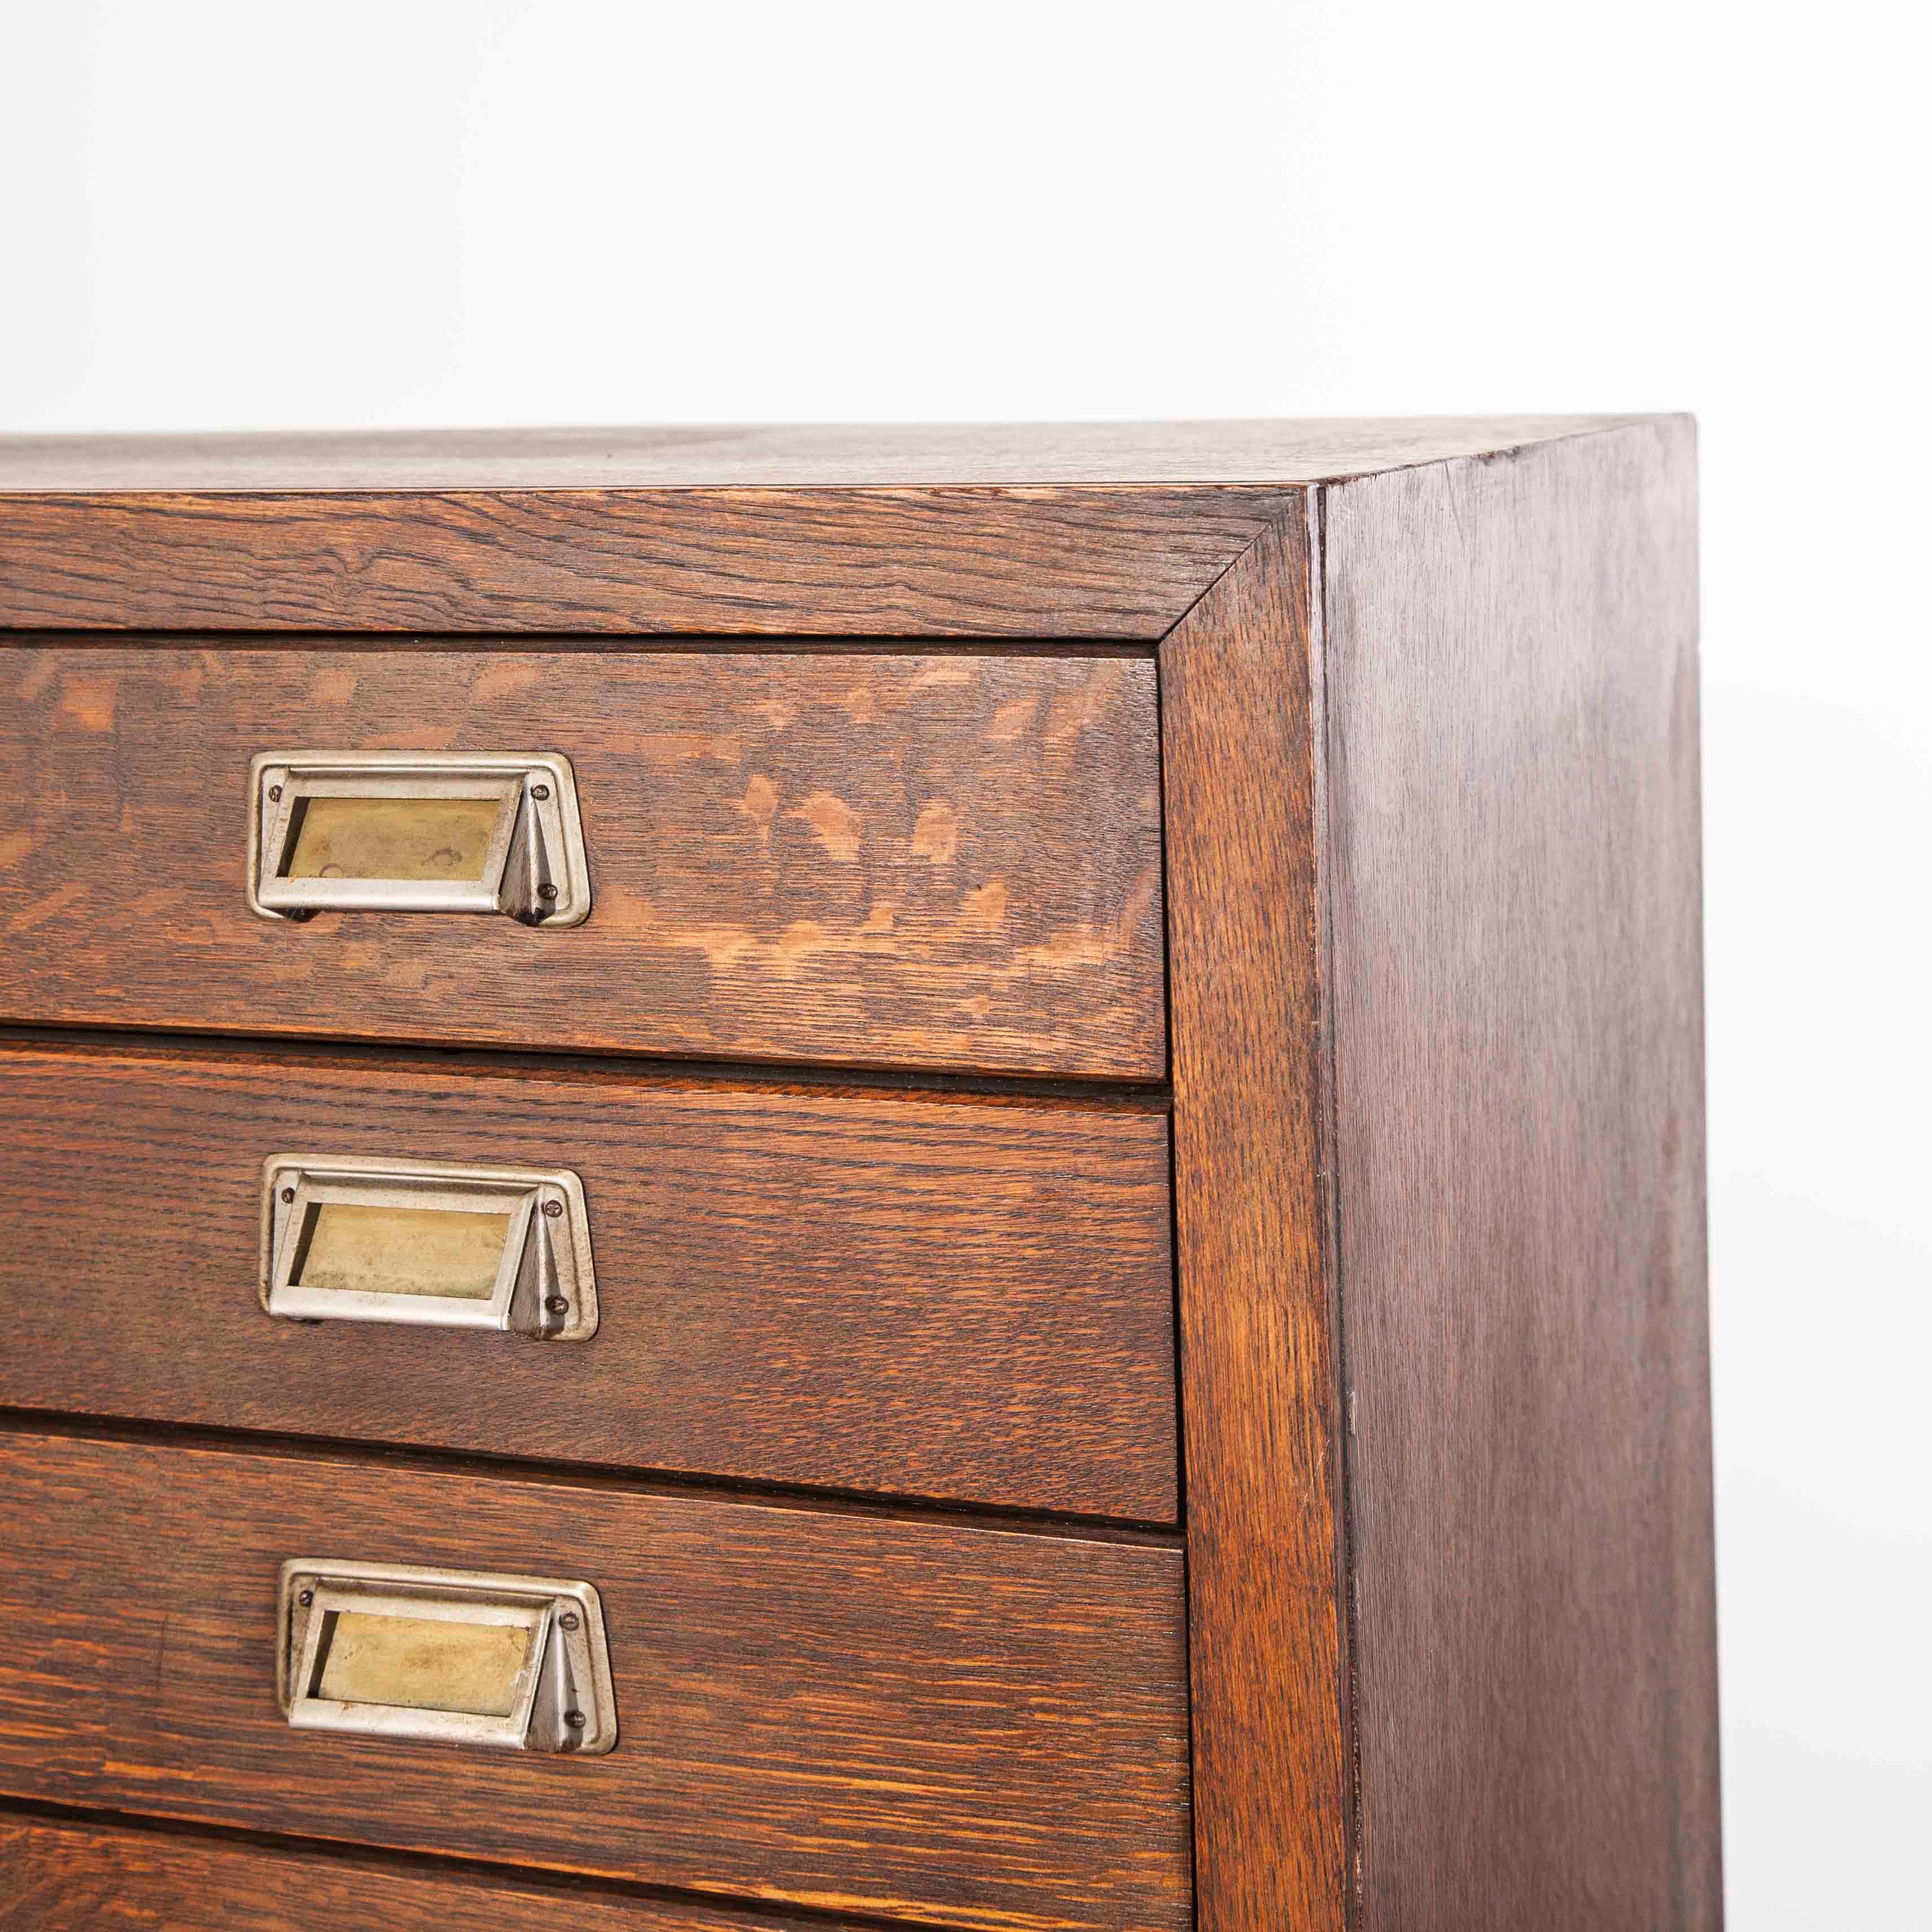 1950s Oak Apothecary Multi Drawer Chest of Drawers, Thirty Nine Drawers 10